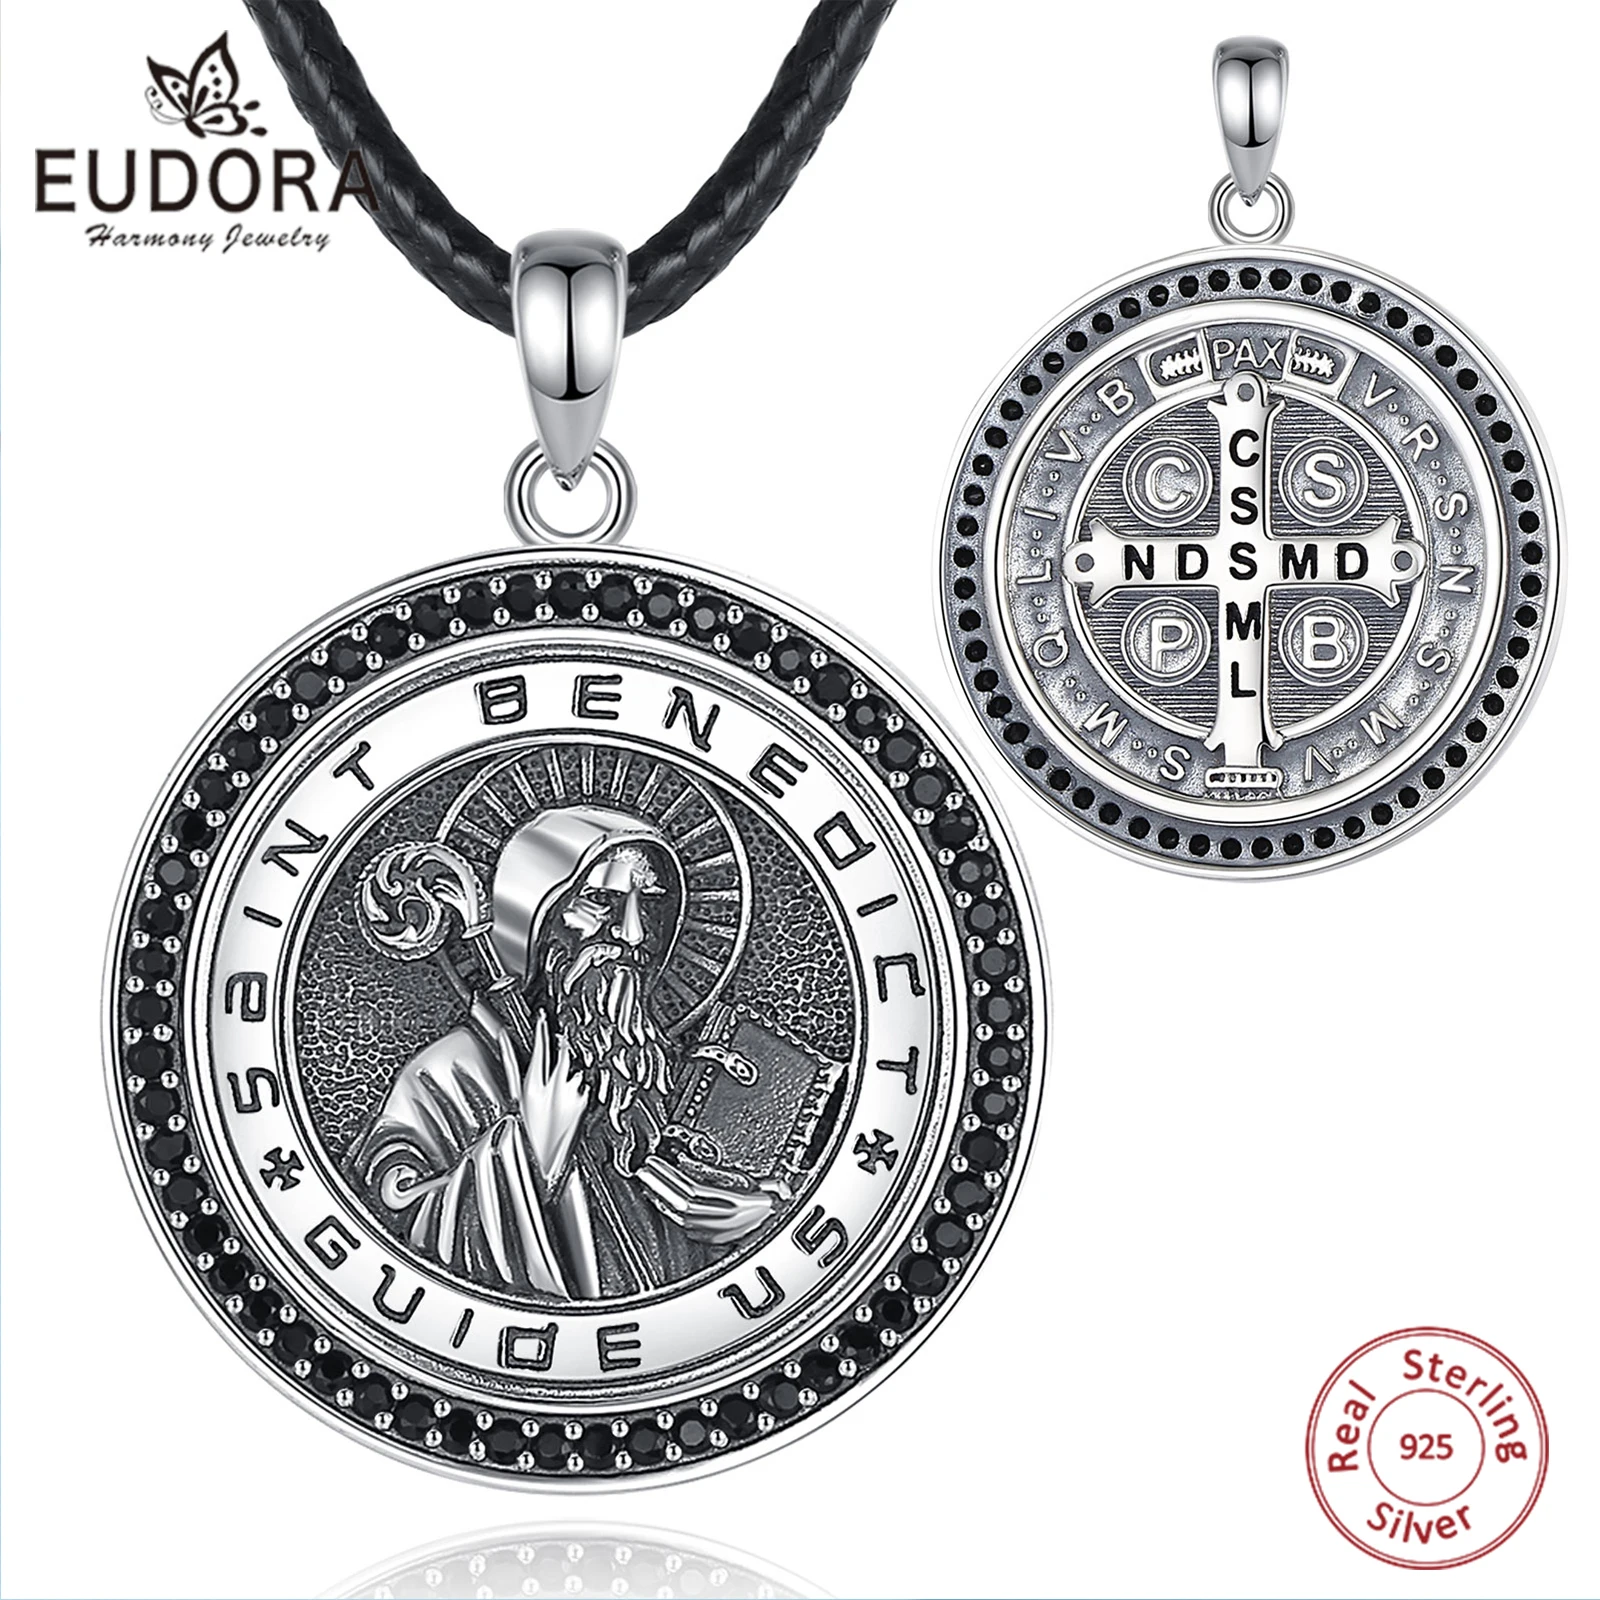 

Eudora 925 Sterling Silver Saint Benedict Medal Necklace Vintage Cross Amulet Pendant Religious Jewelry Party Gift for Men Women